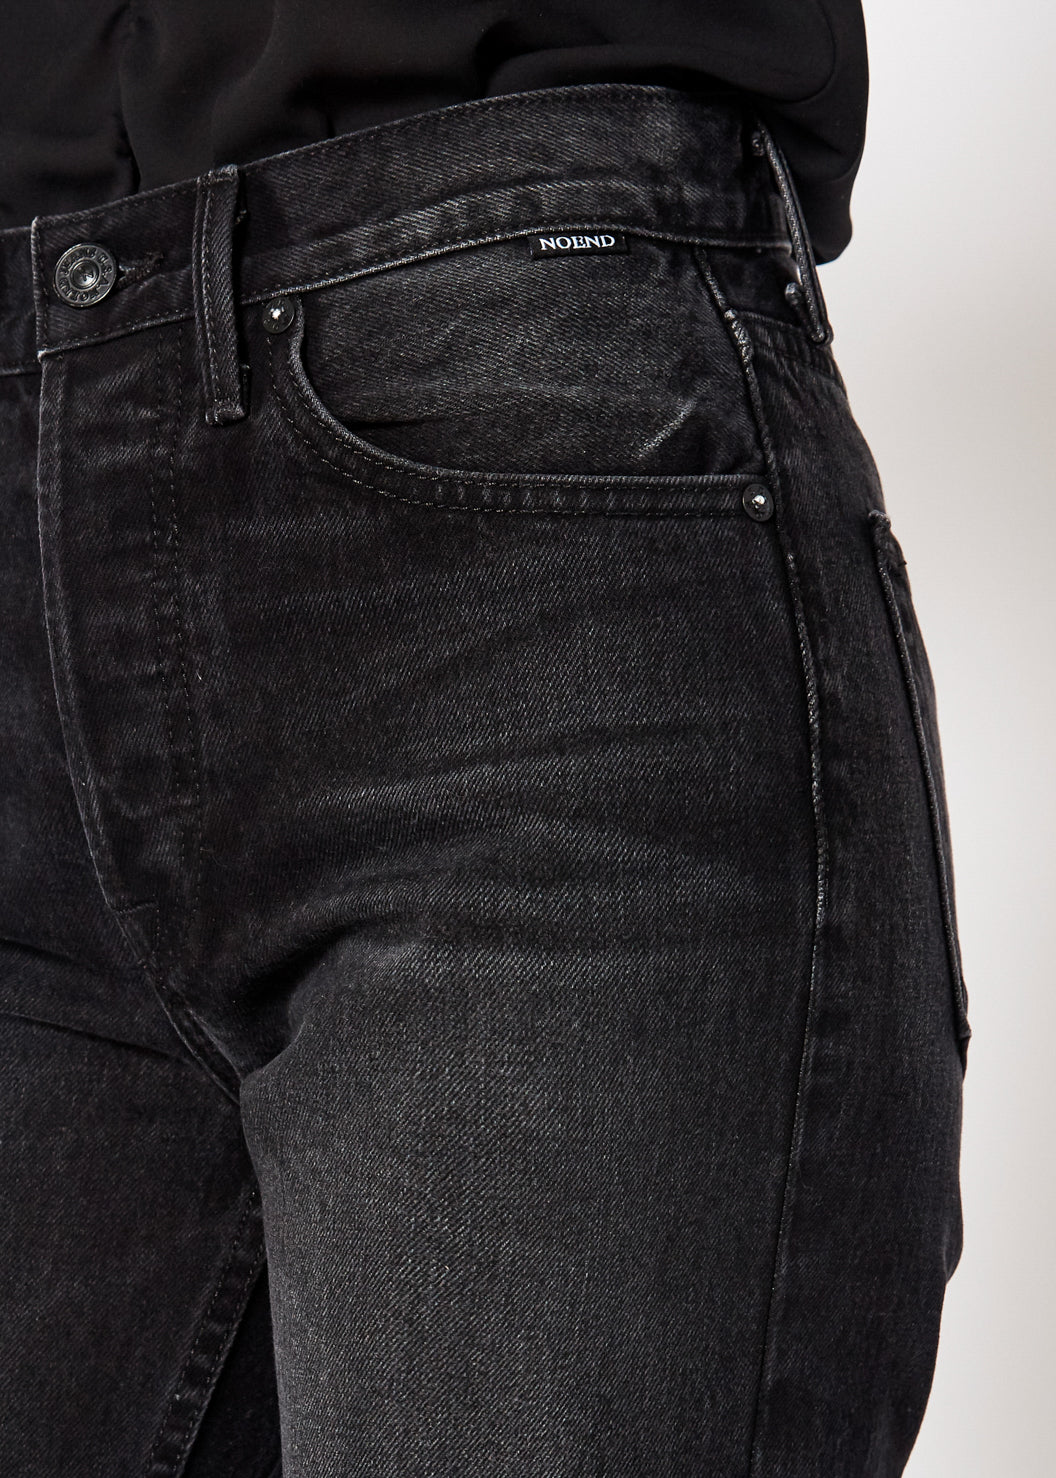 HIGH RISE STRAIGHT CROP IN WASHED BLACK - NOEND DENIM